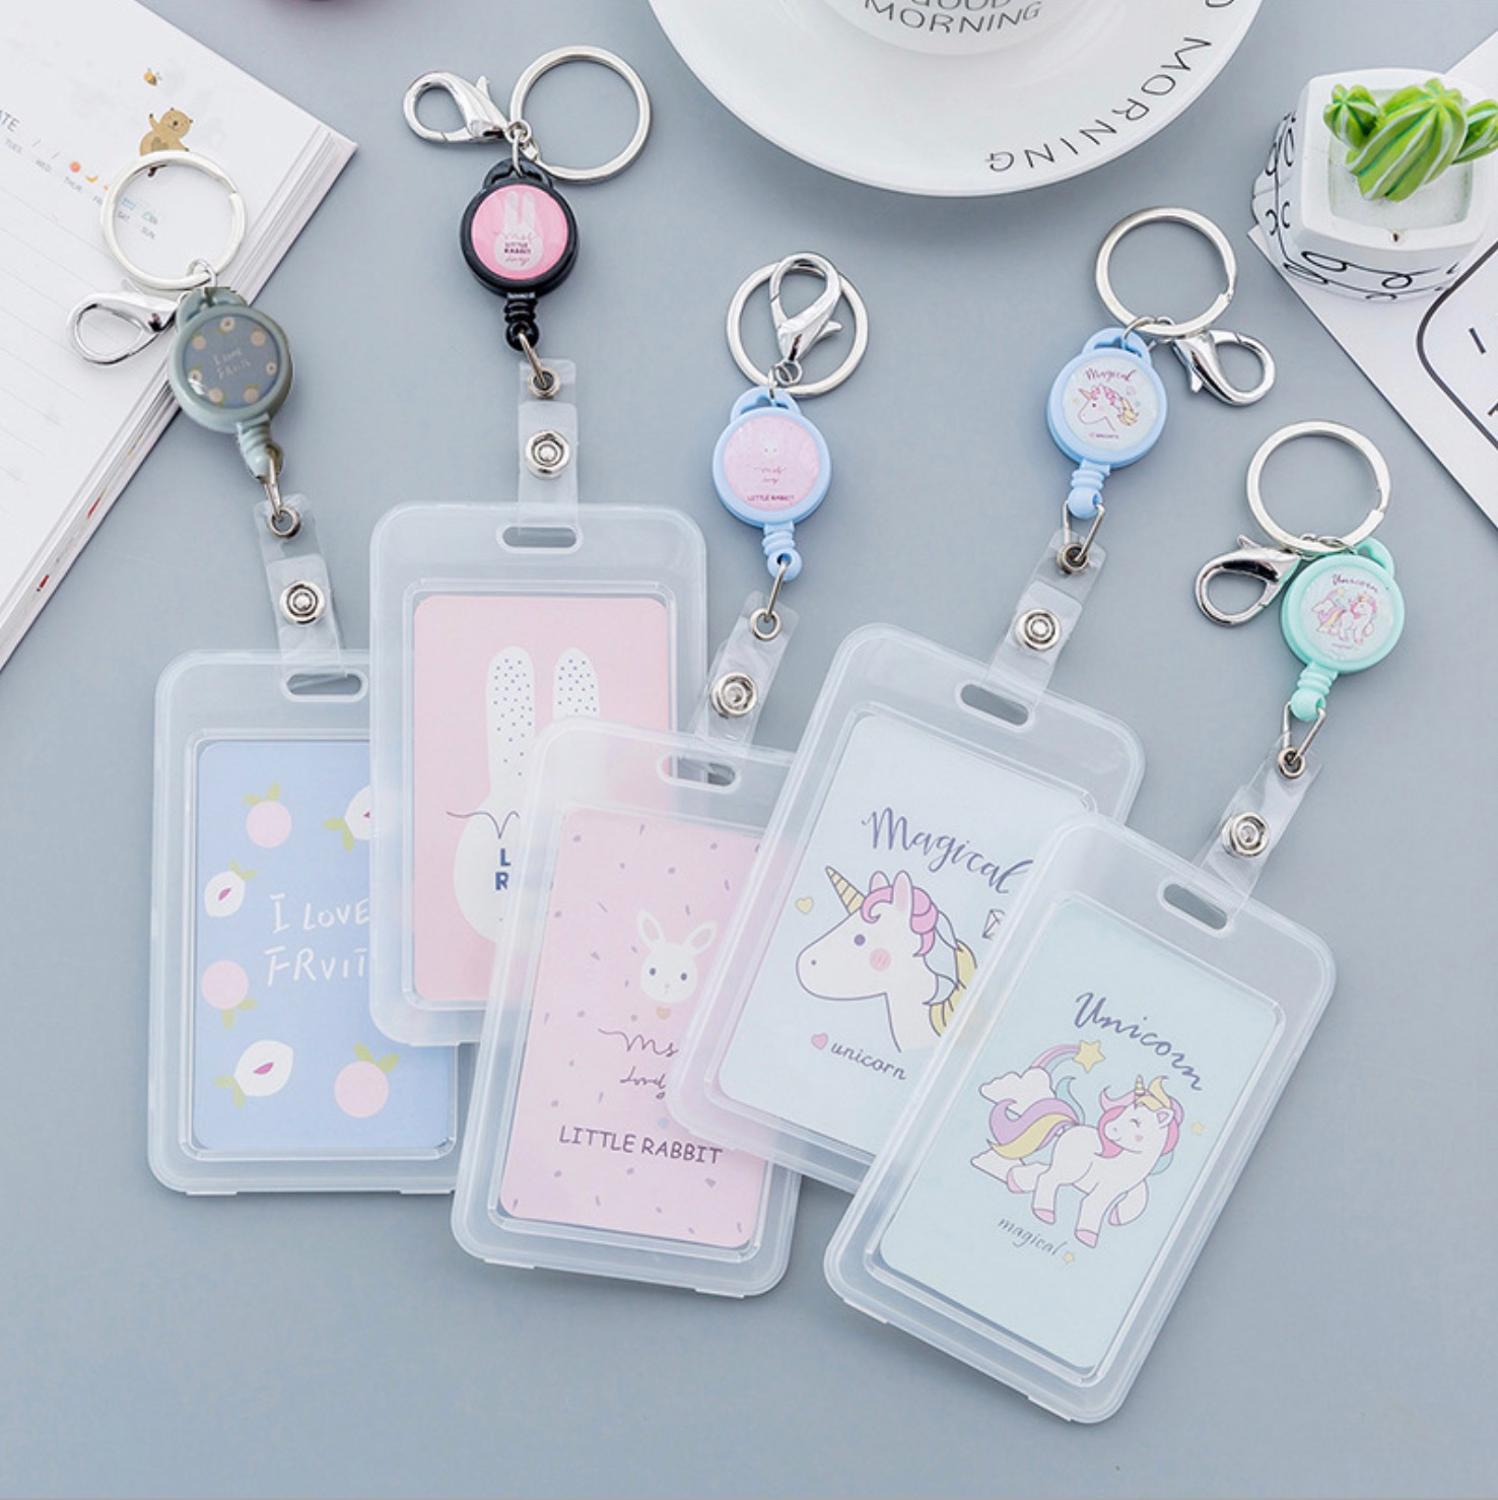 Cute Card Holder With Keychain ID Bus Card Cover Case With Key Rings For Women Men Transparent Plastic Ferrule